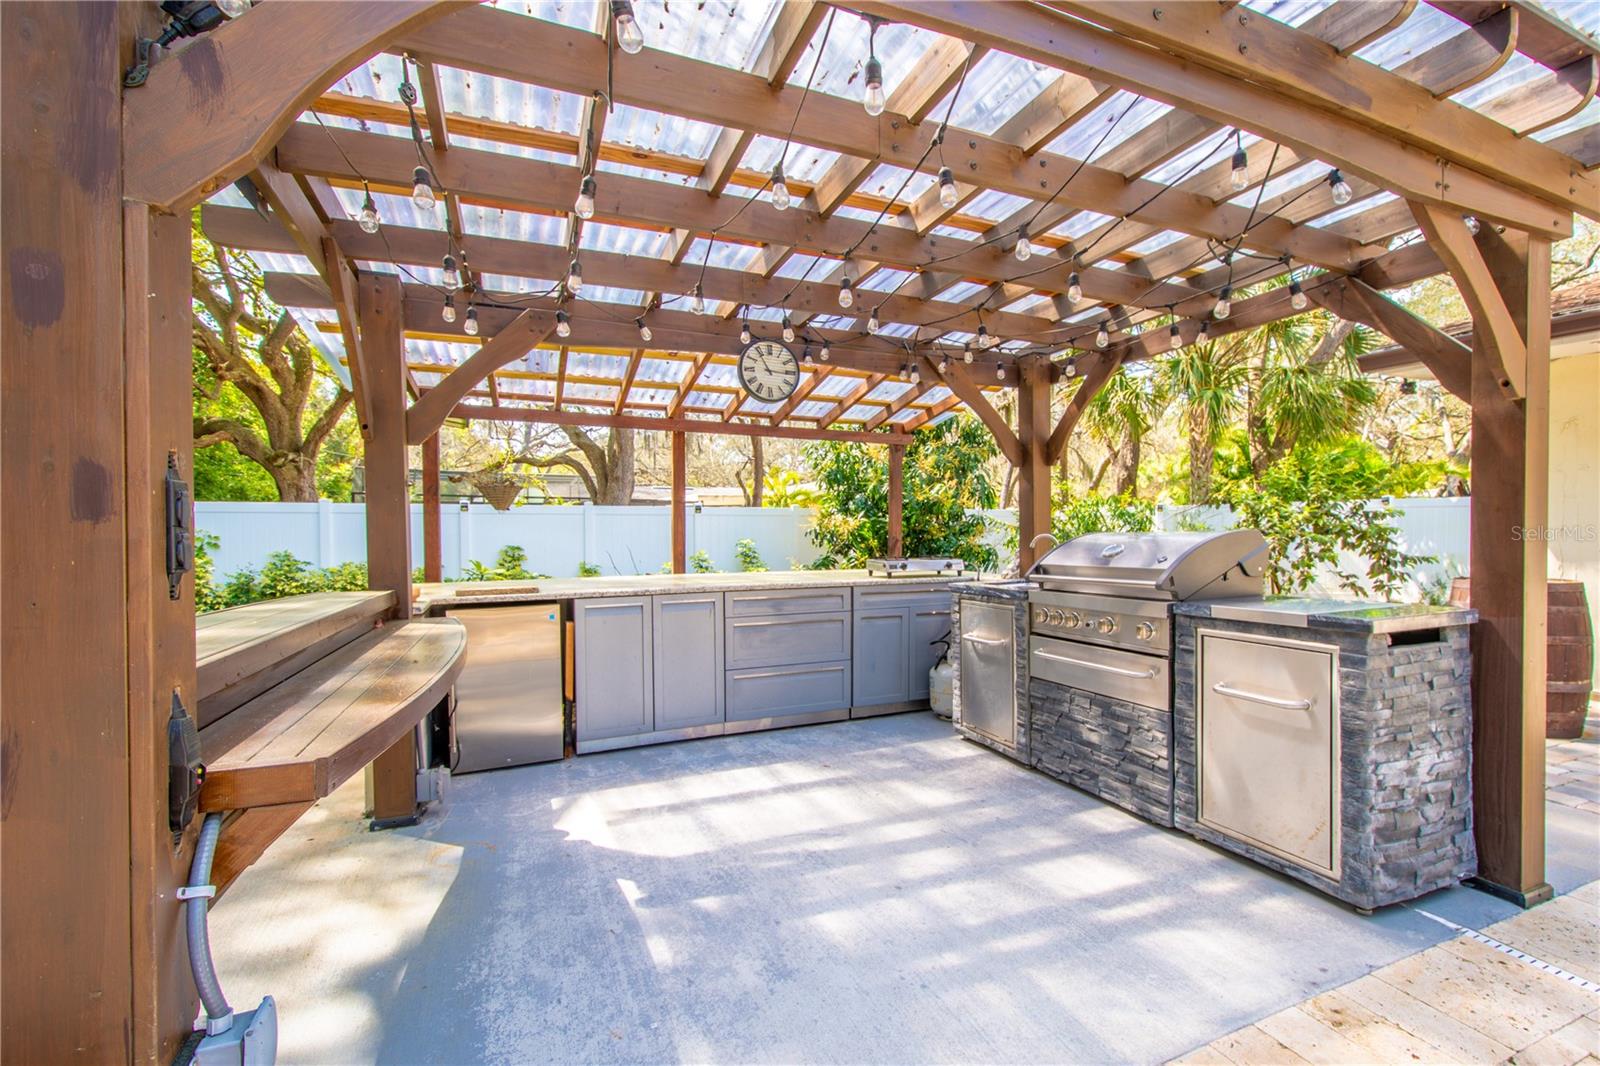 A beautiful outdoor kitchen.